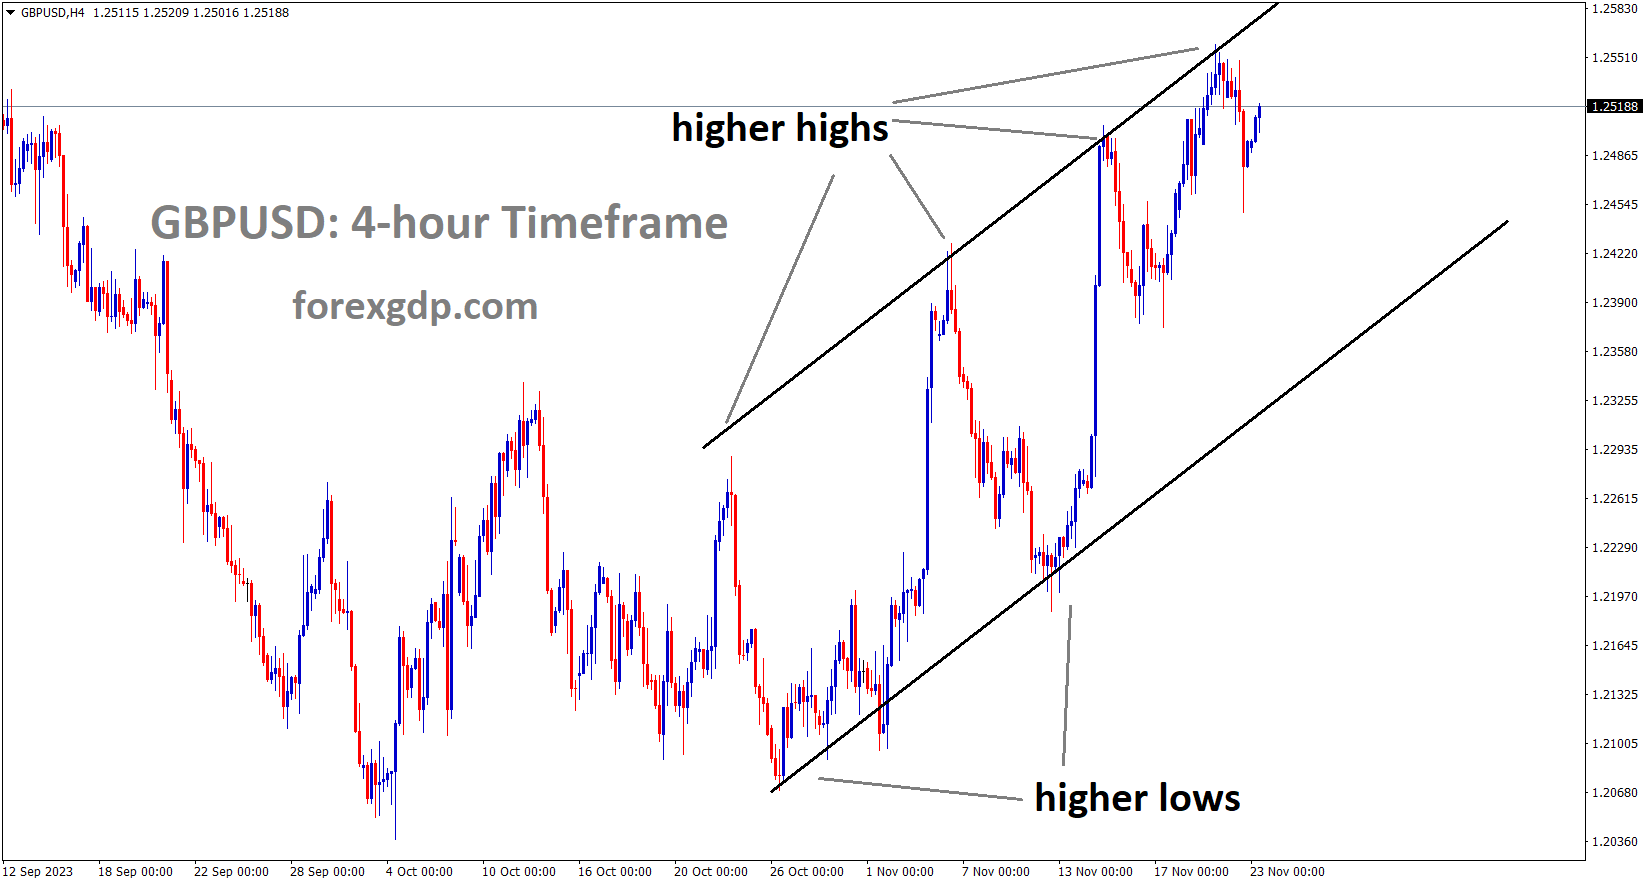 GBPUSD is moving in an Ascending channel and the market has reached the higher high area of the channel